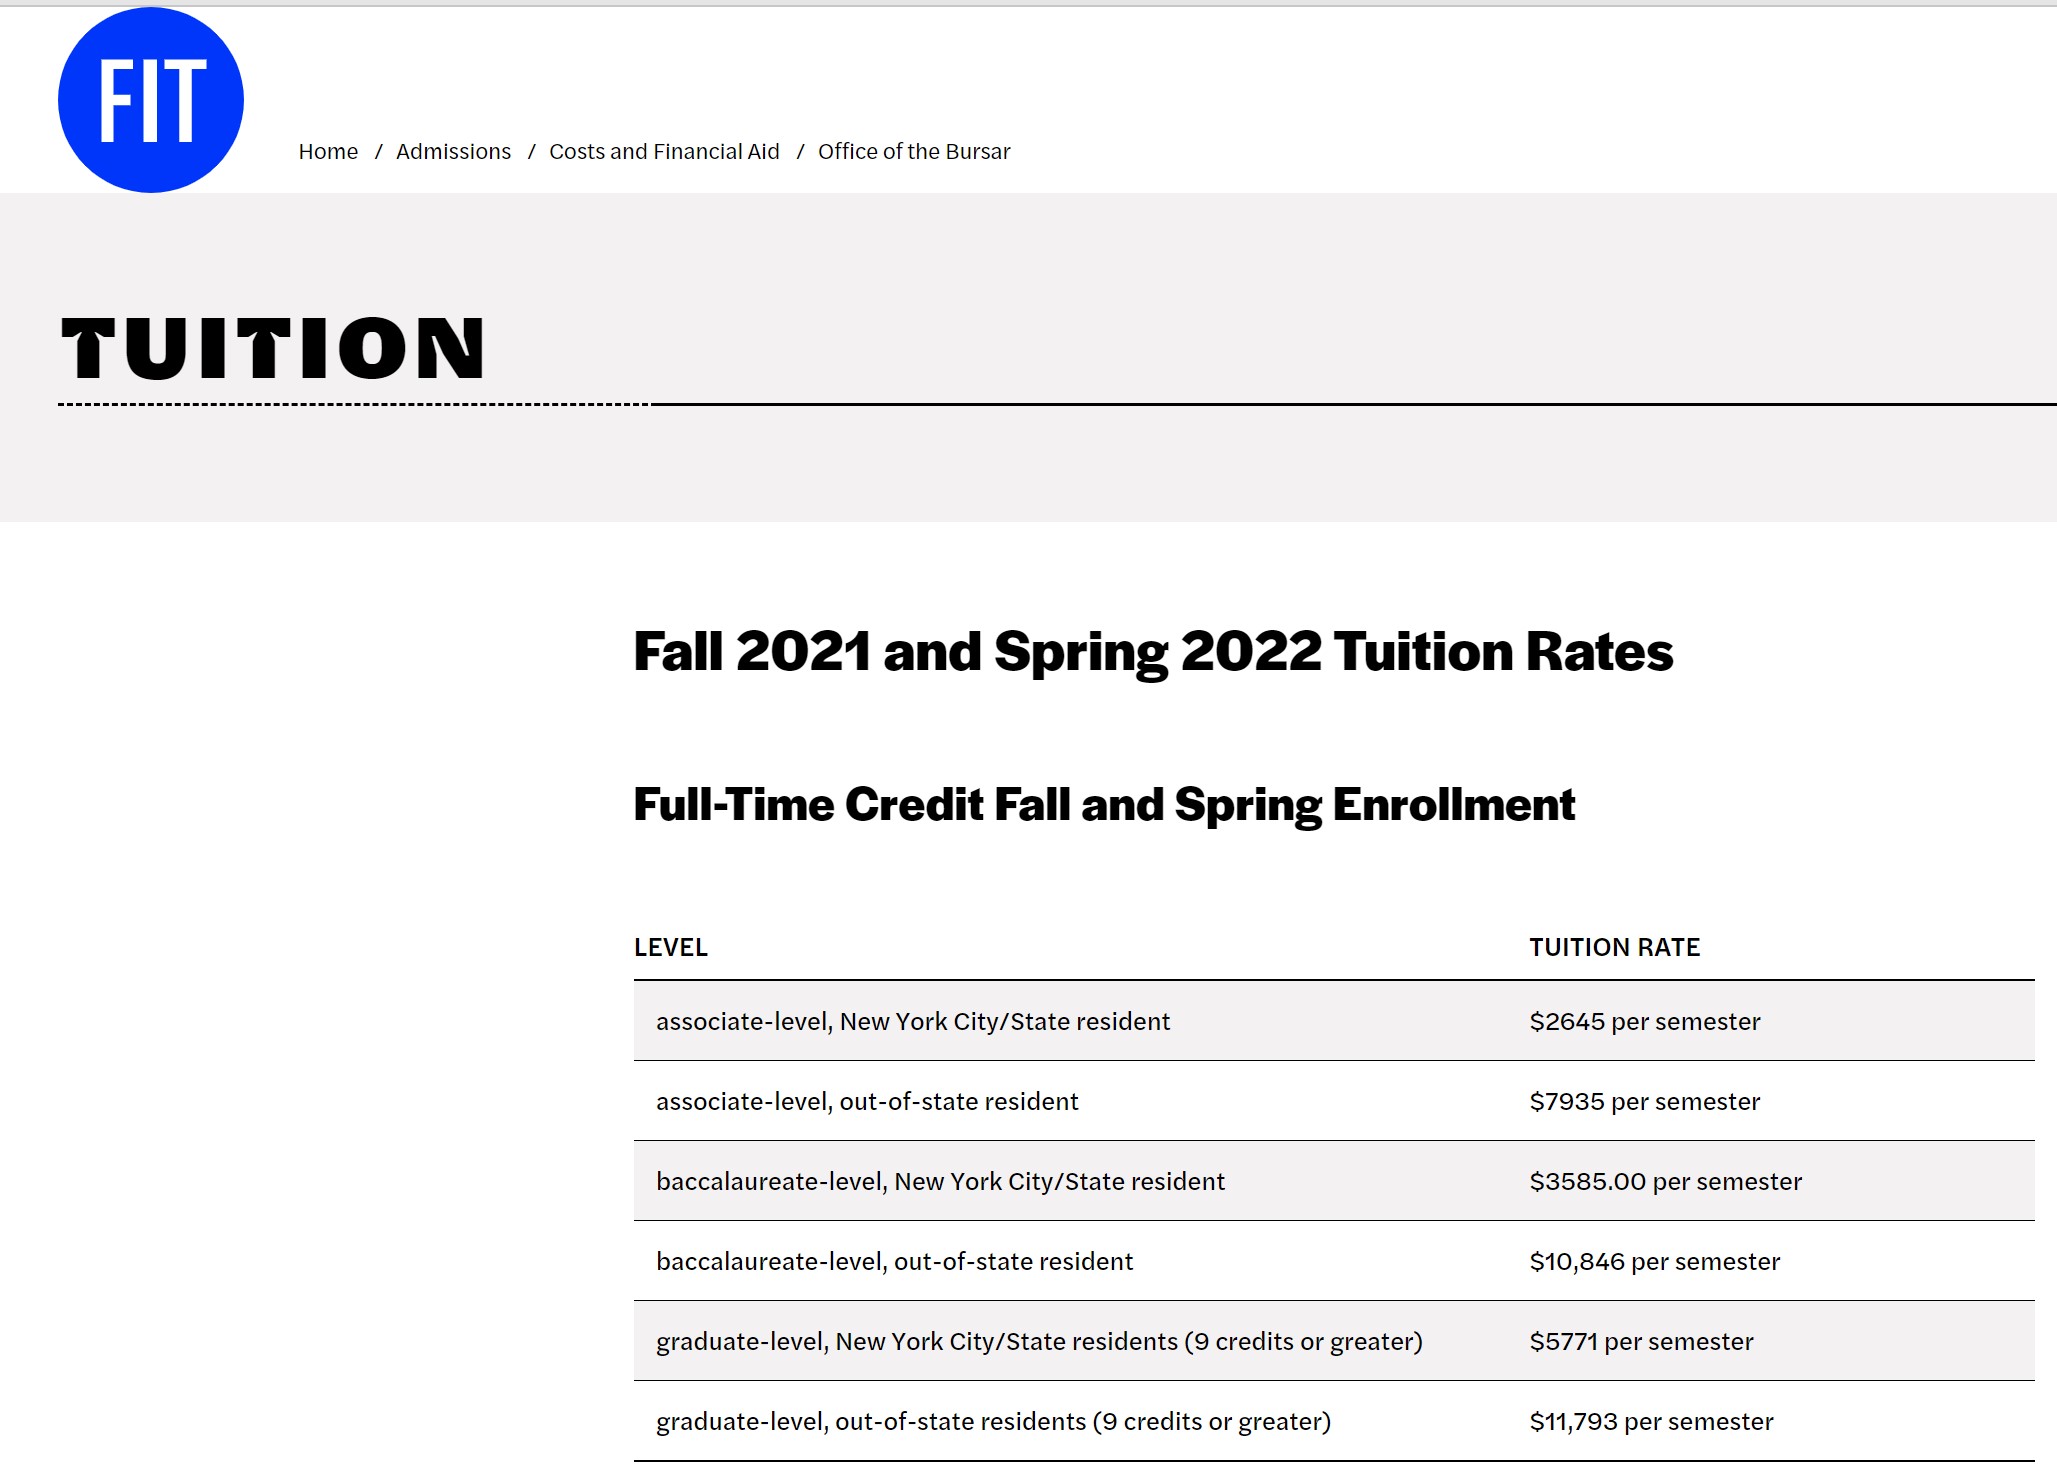 What is FIT tuition 2022? Associate level, resident: $2645 per semester. Non-resident: $7,935 per semester. Bachelor level, New York resident: $3,585 per semester. Non-resident: $10,846 per semester. 